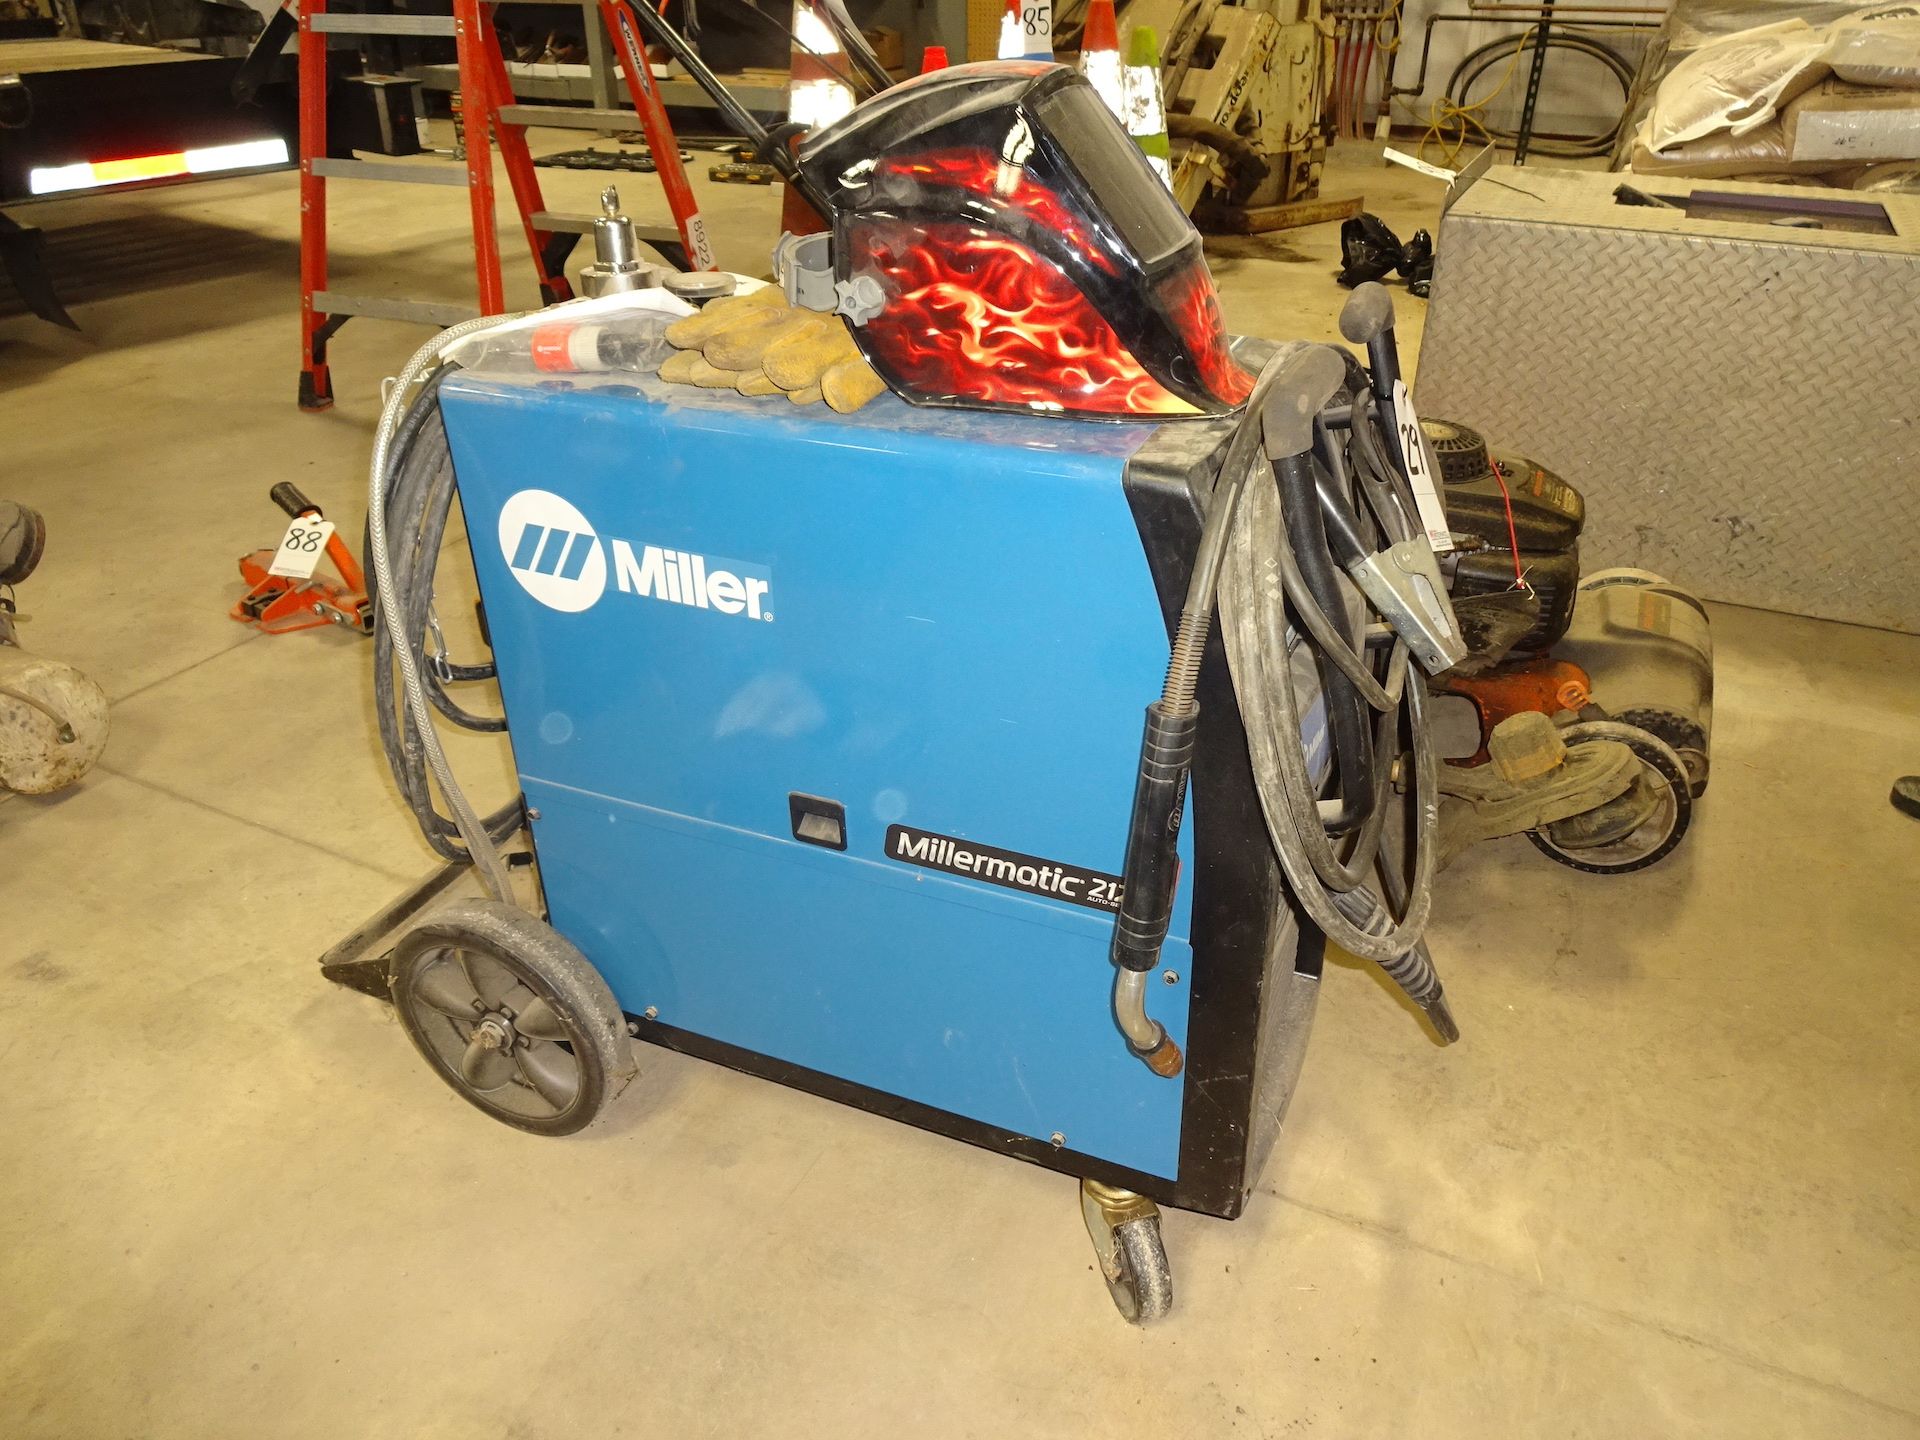 MILLER MILLERMATIC 212 AUTO-SET 160 AMP, 24.5 VOLT, 60% DUTY CYCLE, MAXOCV34, S/N MH410338N, WITH - Image 4 of 7